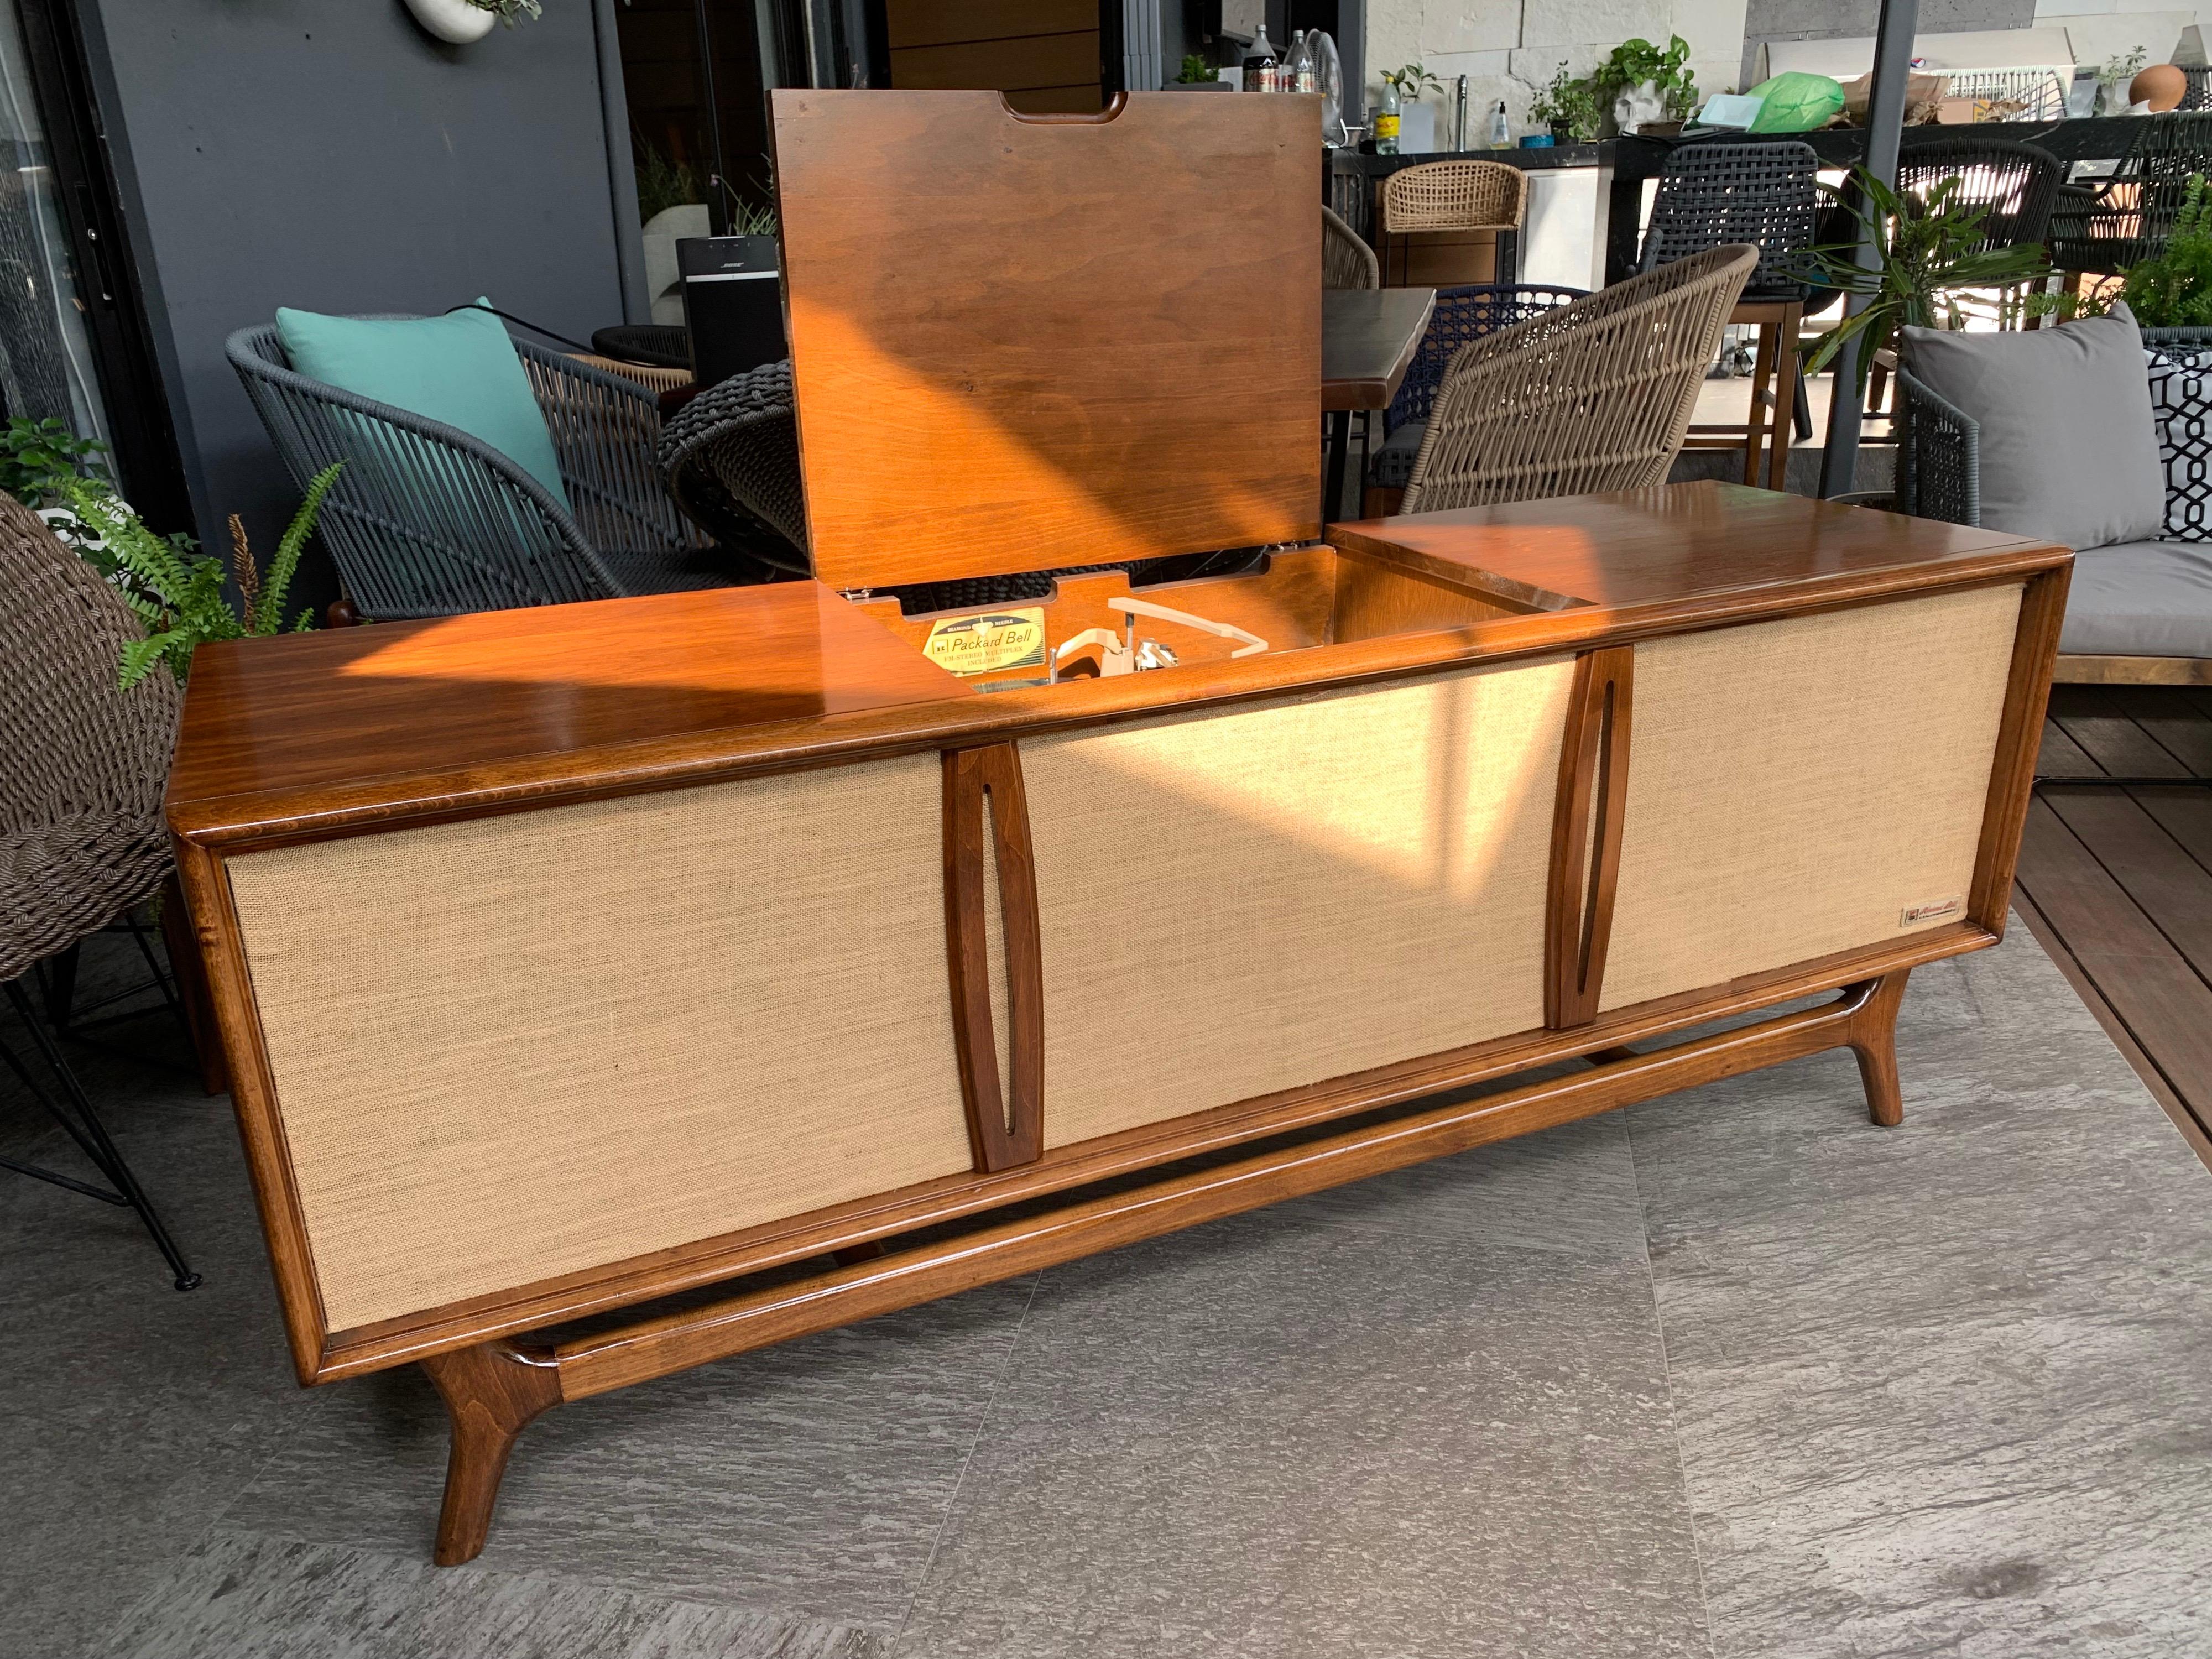 Spectacular midcentury console made in the 1960s, mahogany wood, the original system we believe does not work. The entire exterior and interior was professionally restored.